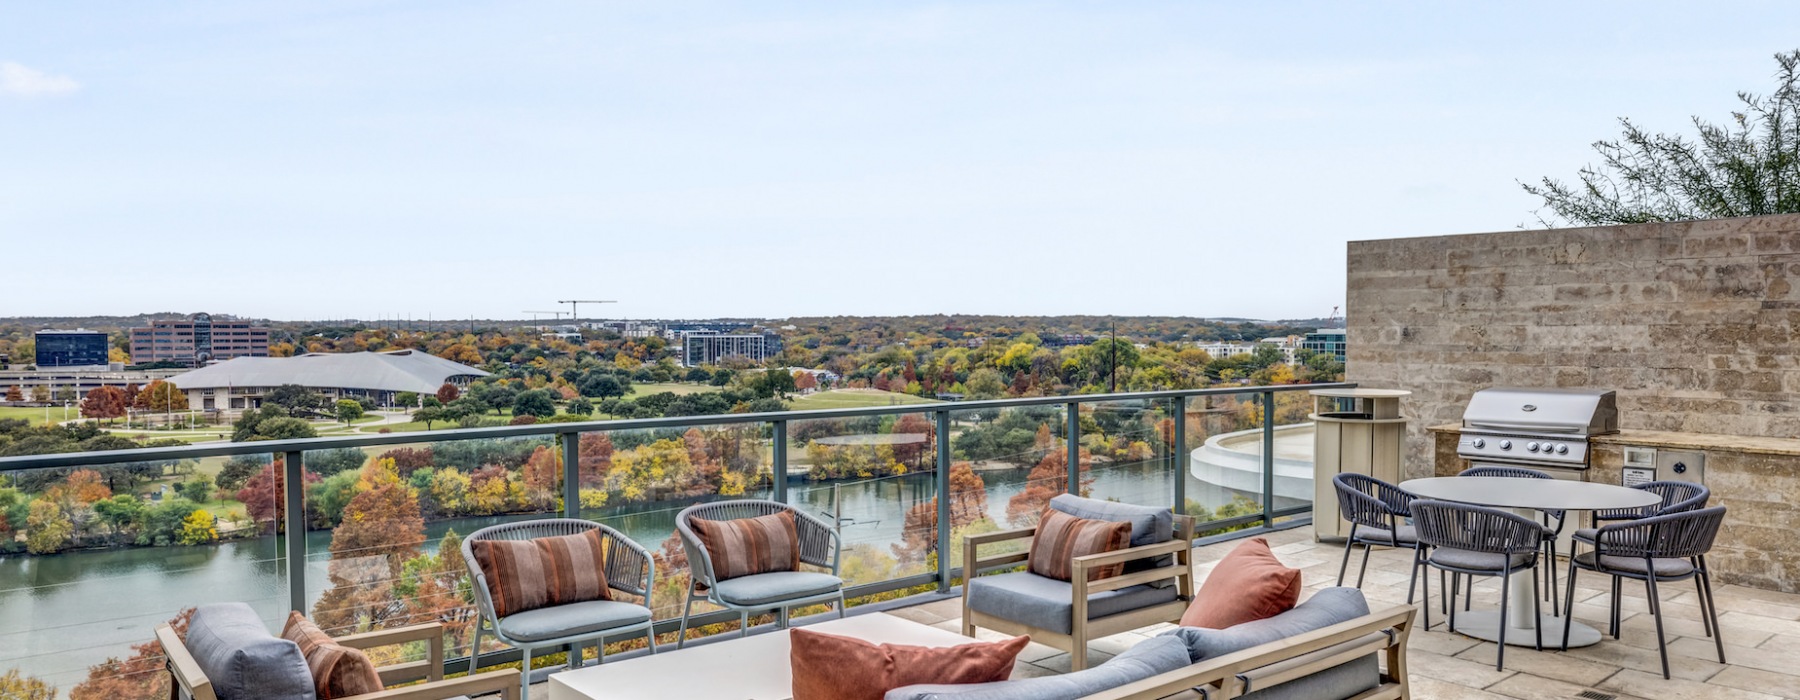 Lounge area overlooking Lady Bird Lake at Northshore in Austin, TX